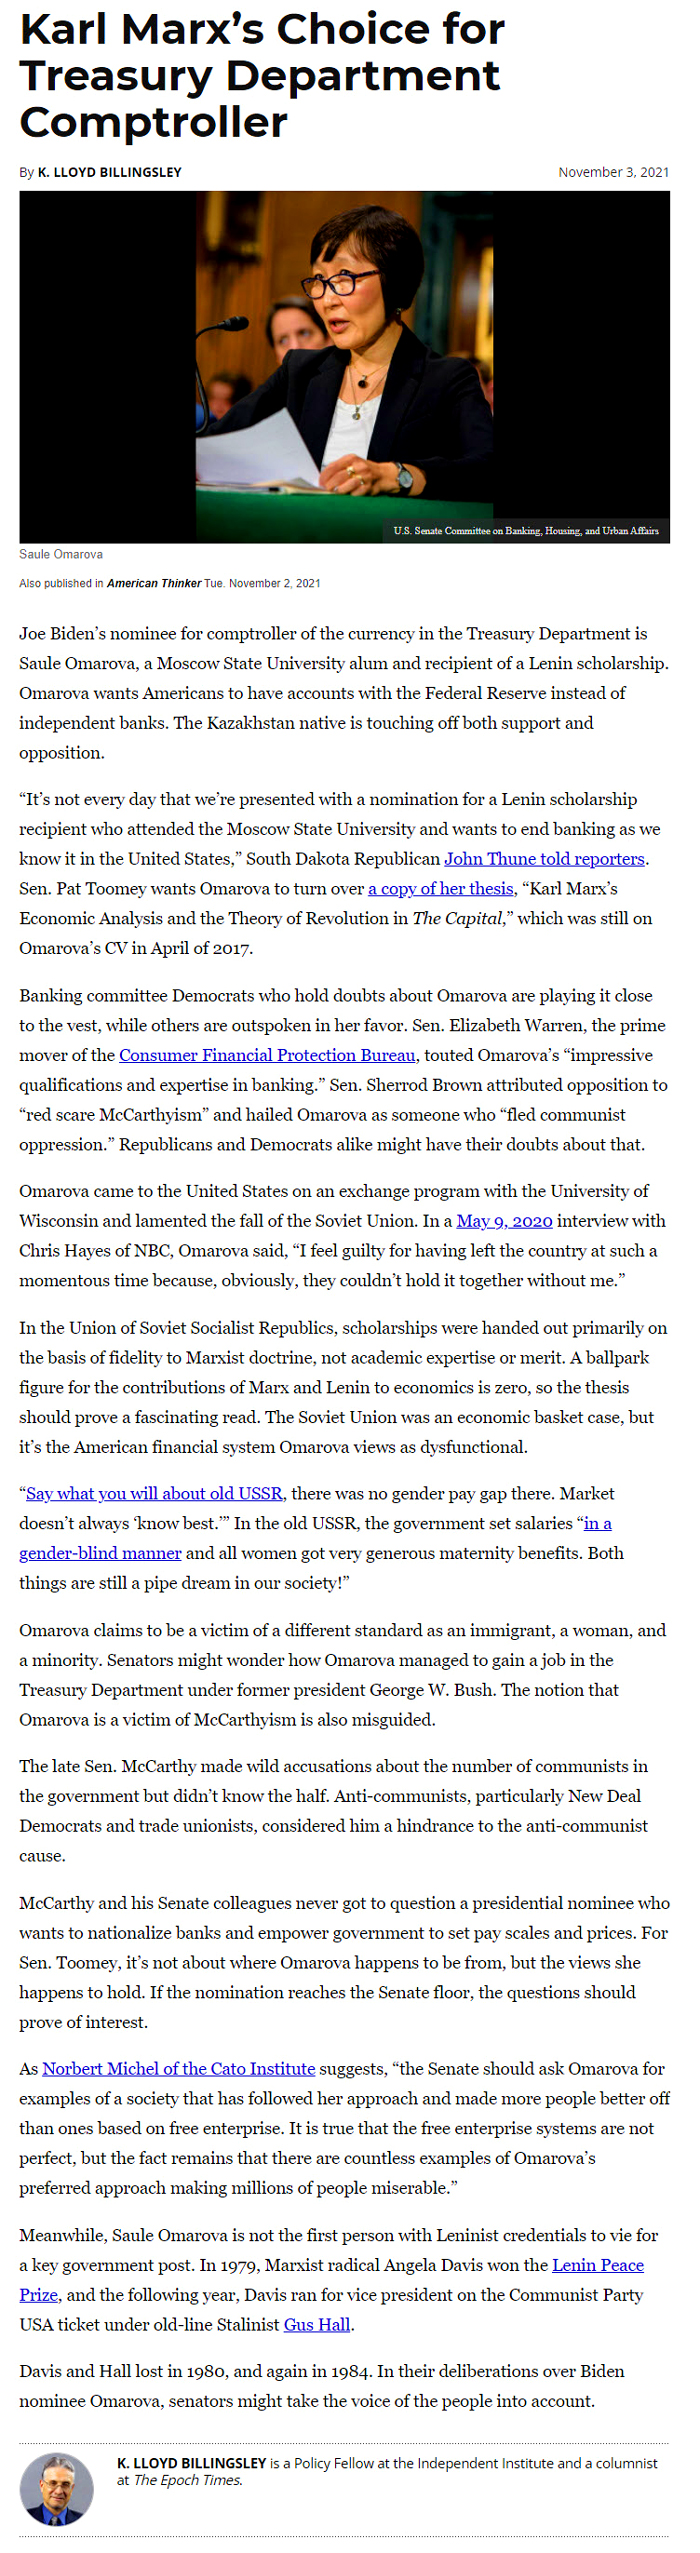 "Joe Biden’s nominee for comptroller of the currency in the Treasury Department is Saule Omarova, a Moscow State University alum and recipient of a Lenin scholarship. Omarova wants Americans to have accounts with the Federal Reserve instead of independent banks. The Kazakhstan native is touching off both support and opposition." - Independent November 2021